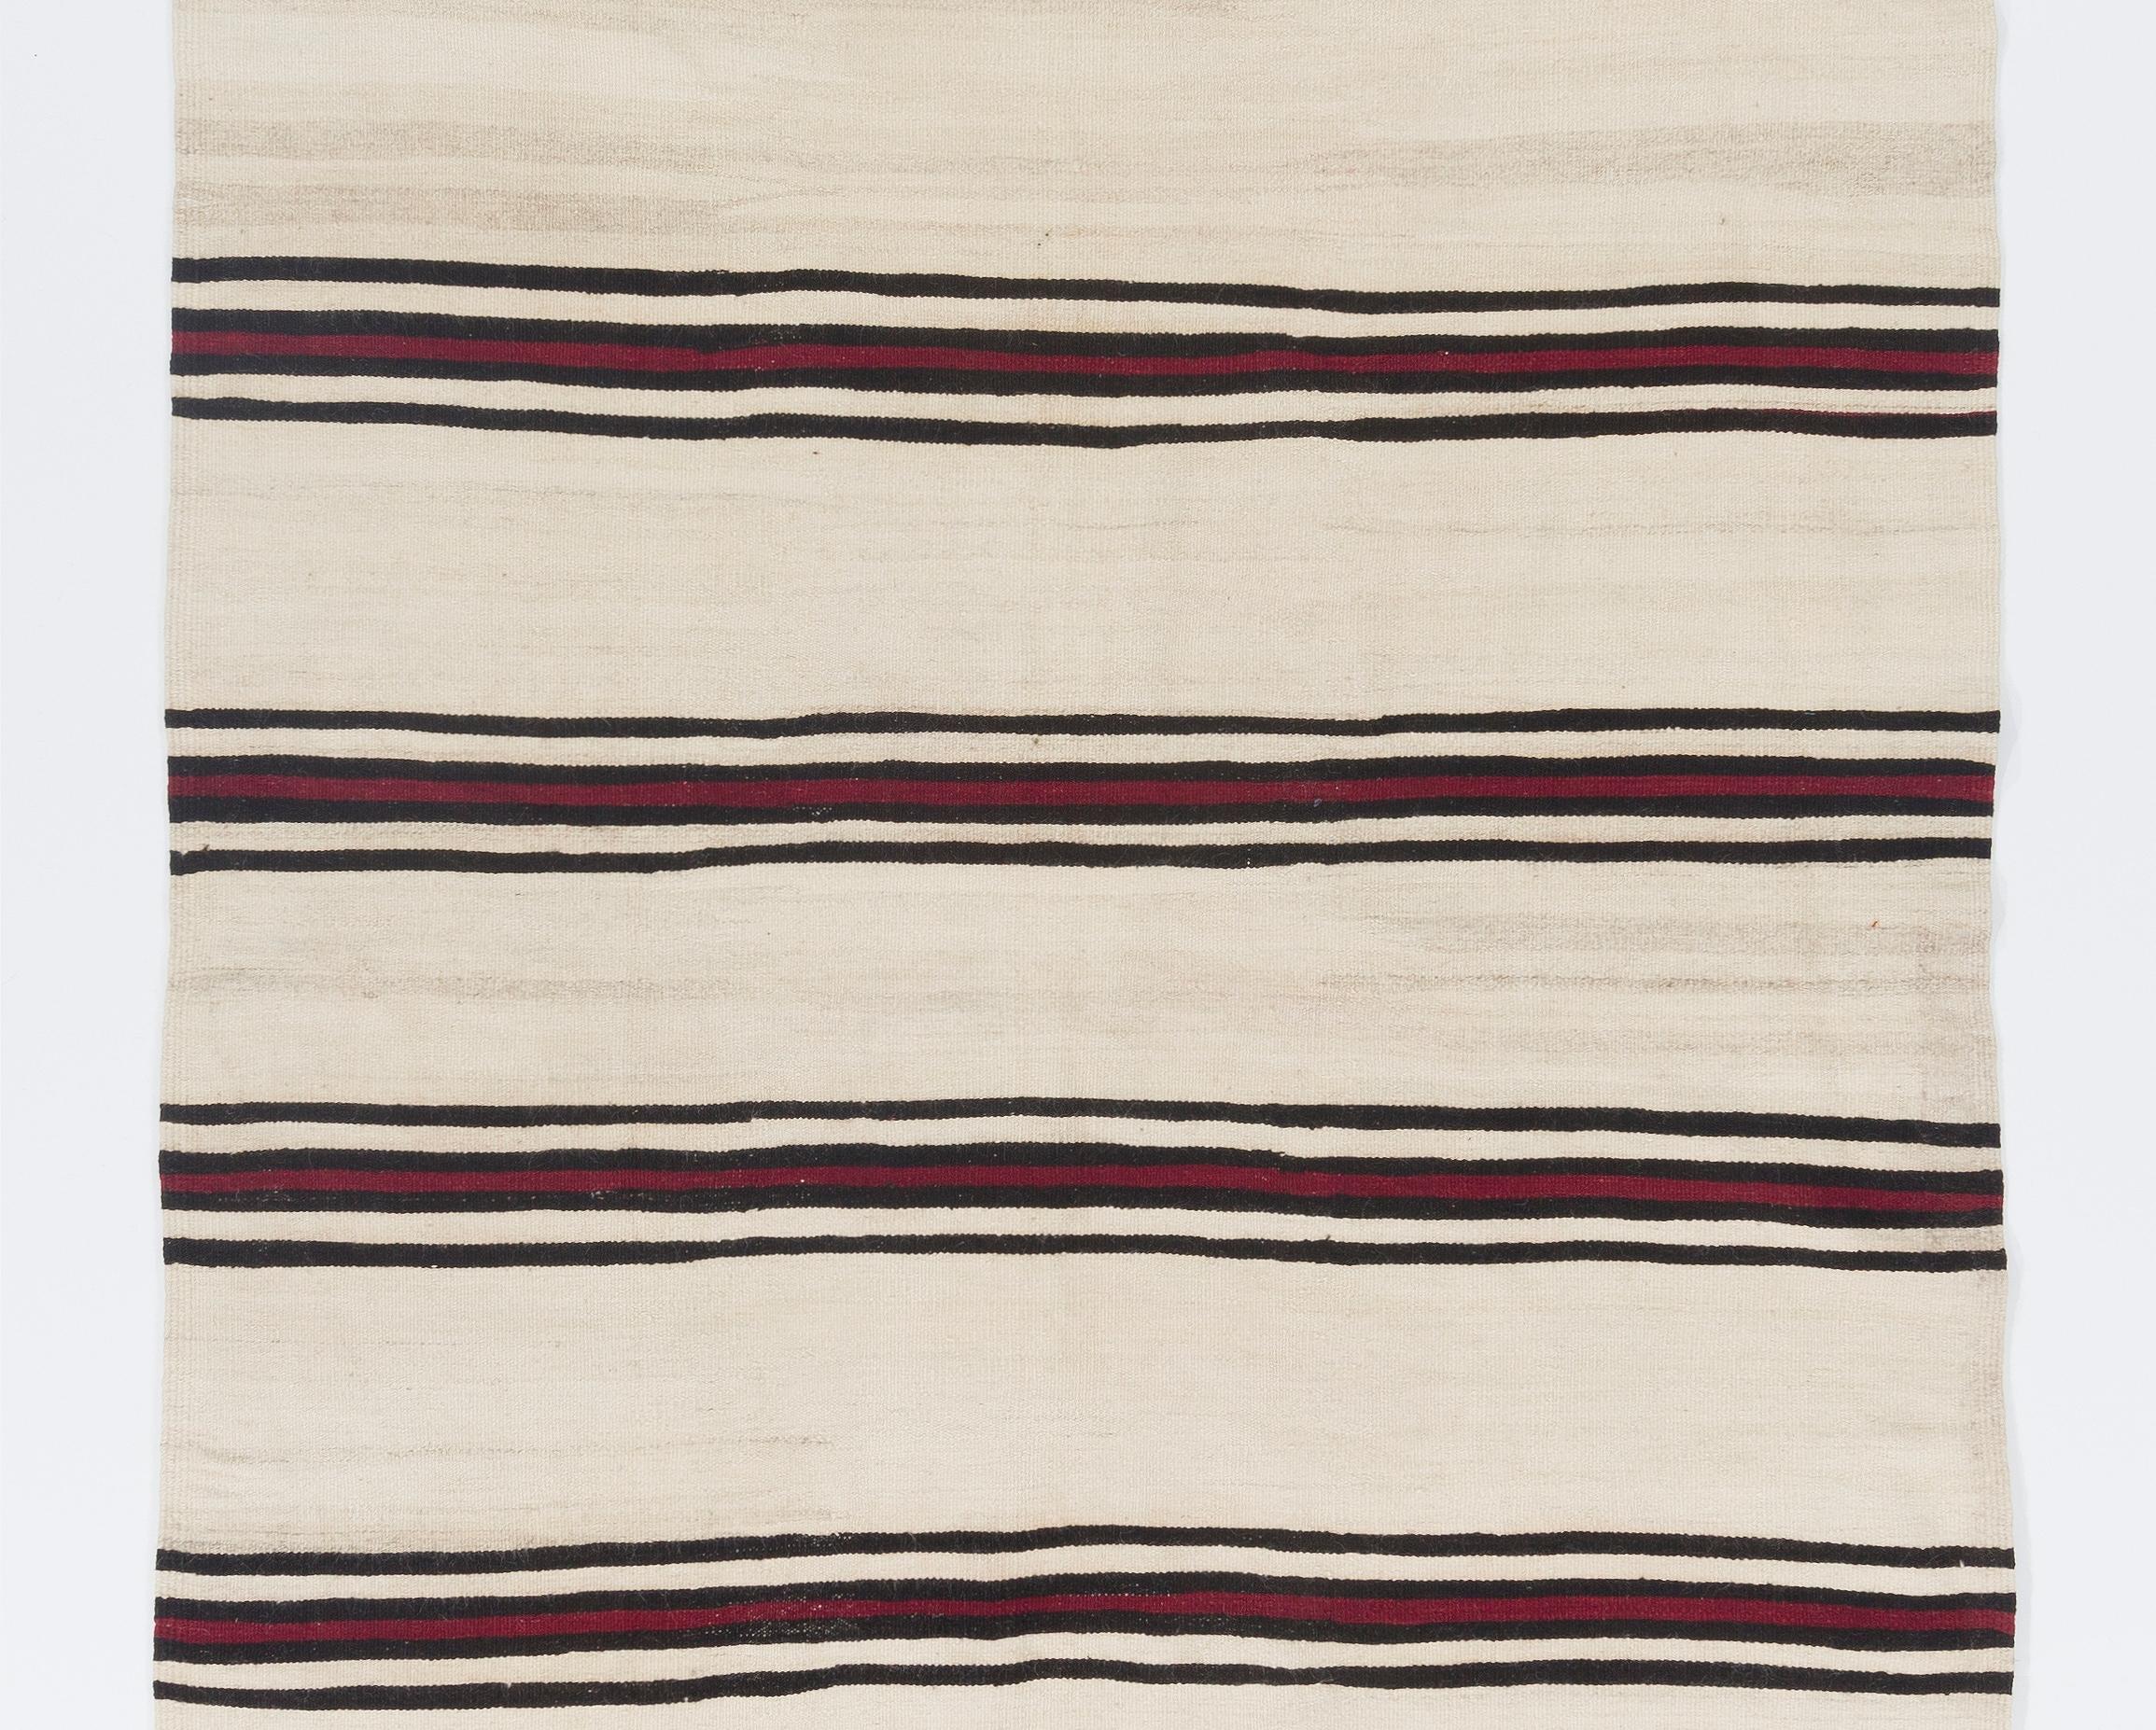 Turkish 5x13.7 Ft Hand-Woven Kilim Runner, 100% Natural Wool, Striped Flat-Weave Rug For Sale